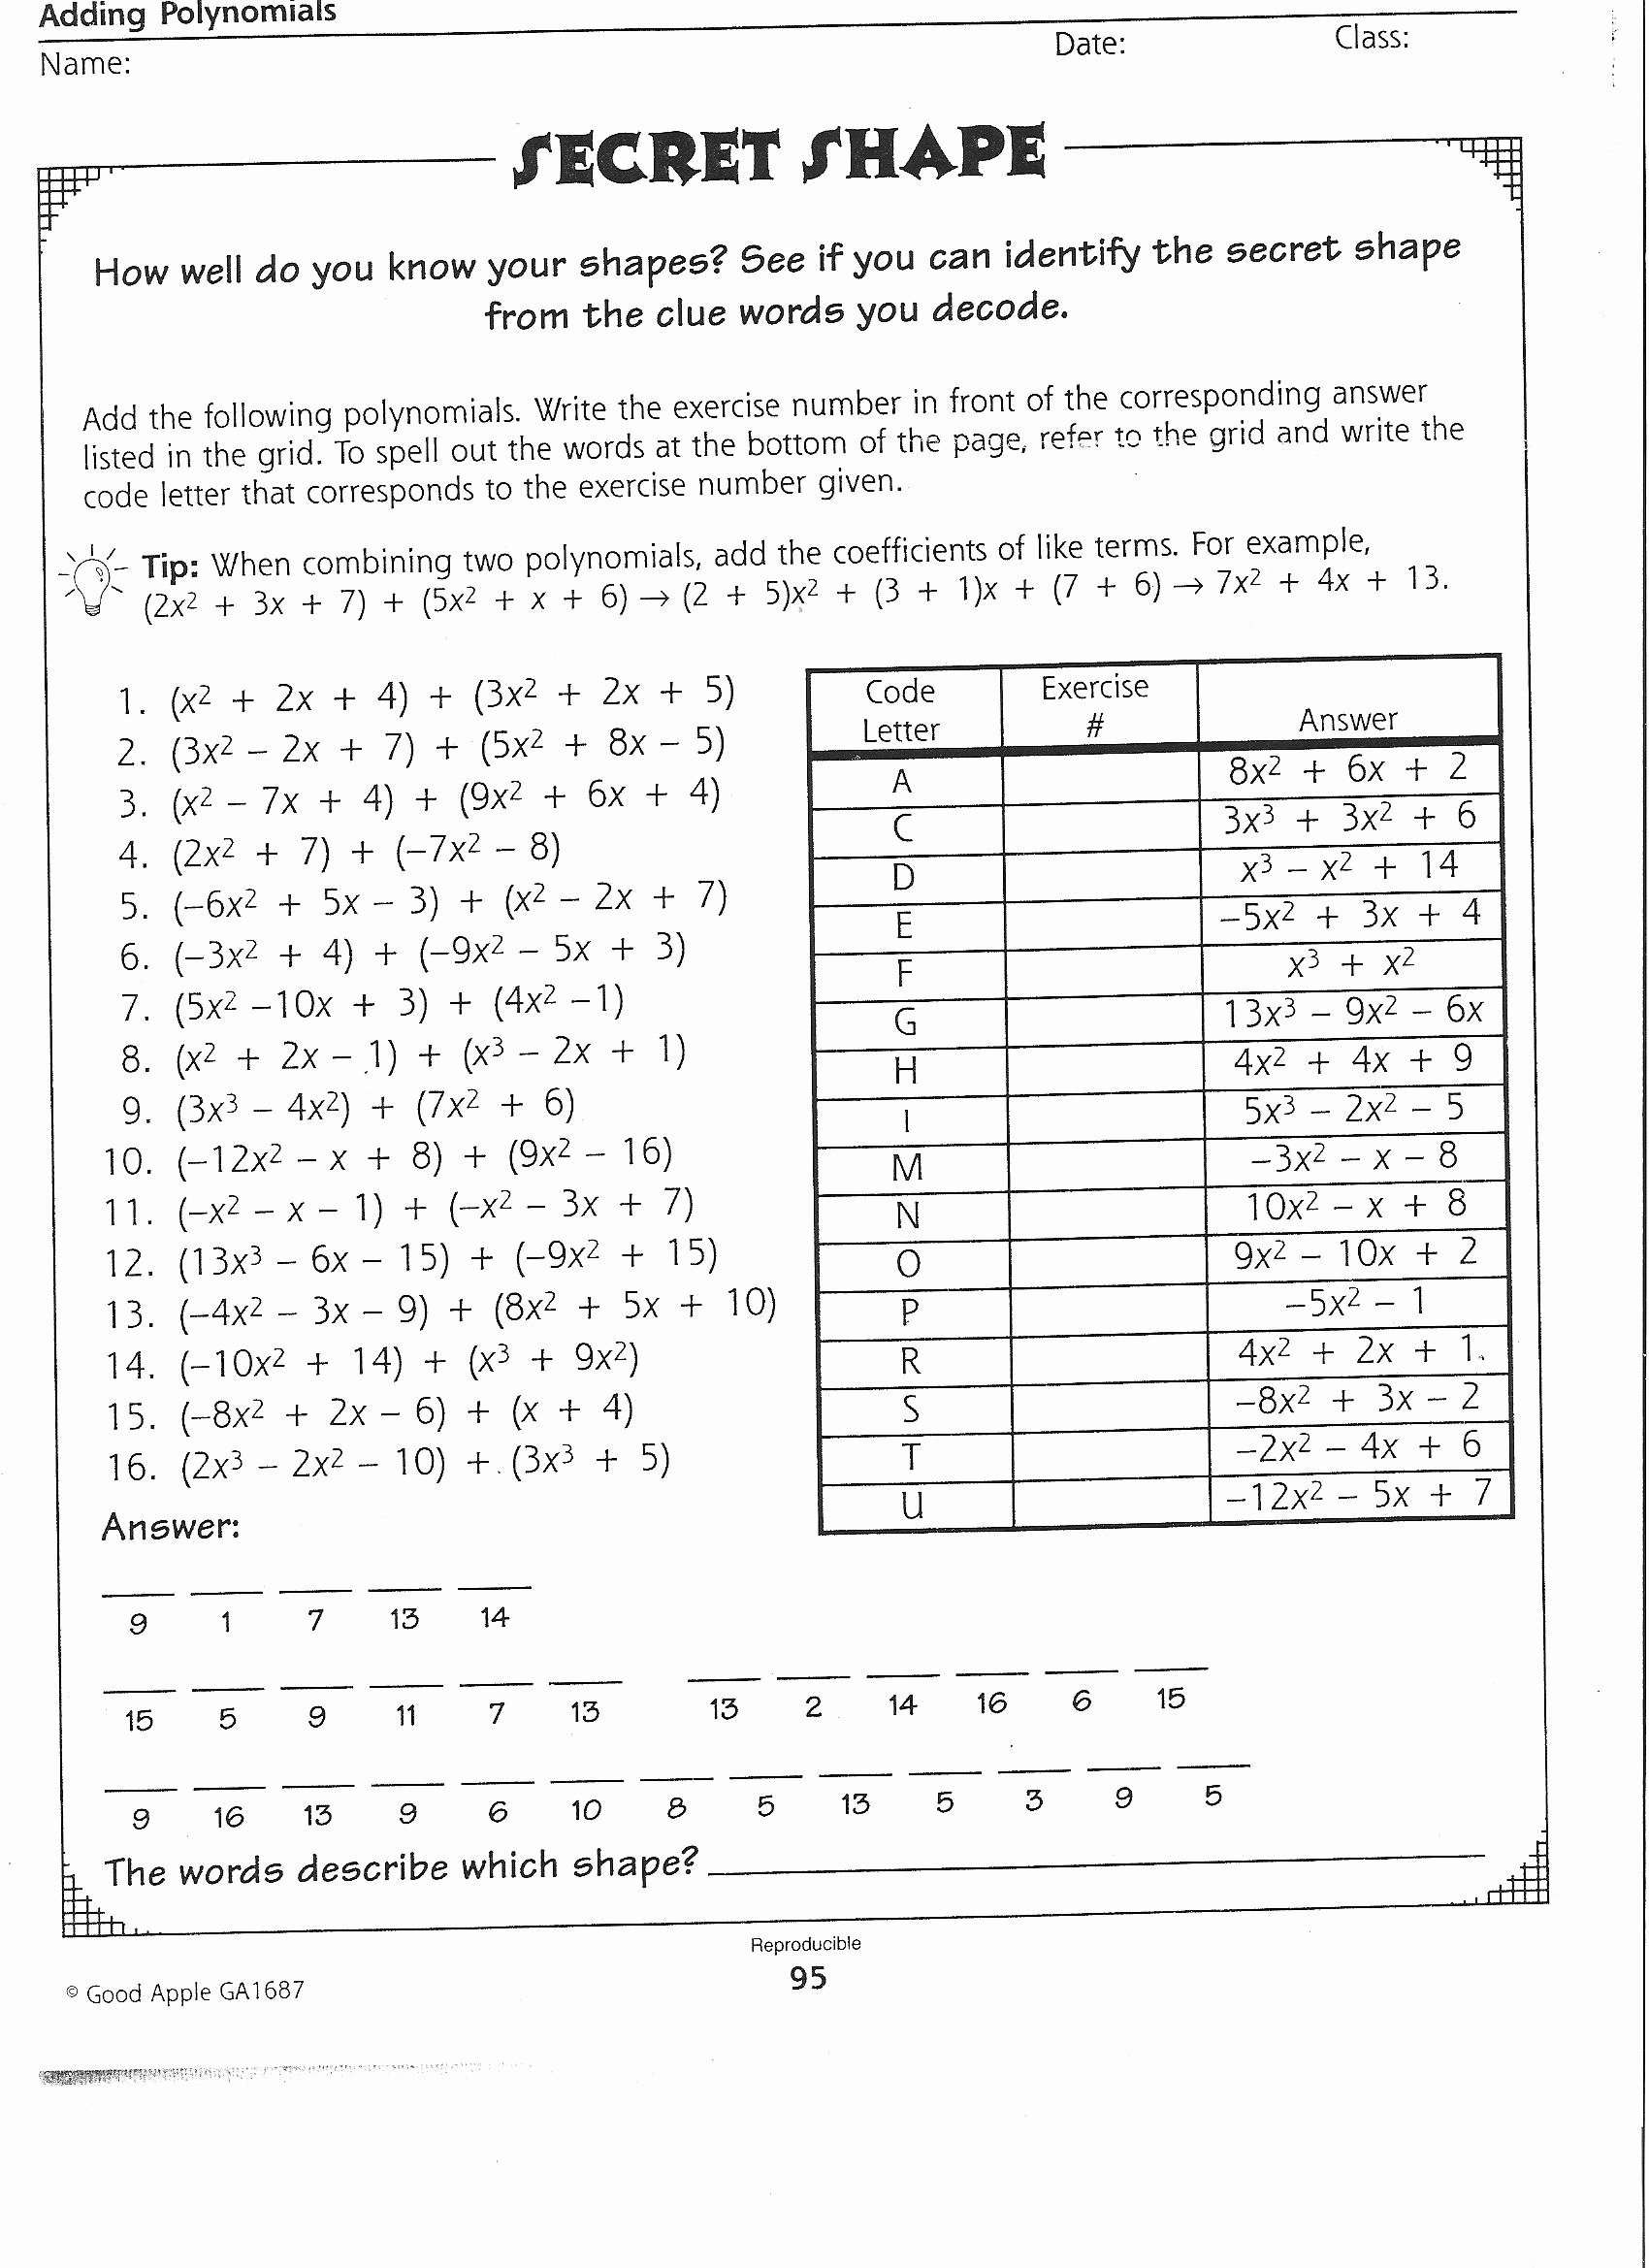 Adding Subtracting Polynomials Worksheet Awesome Alex